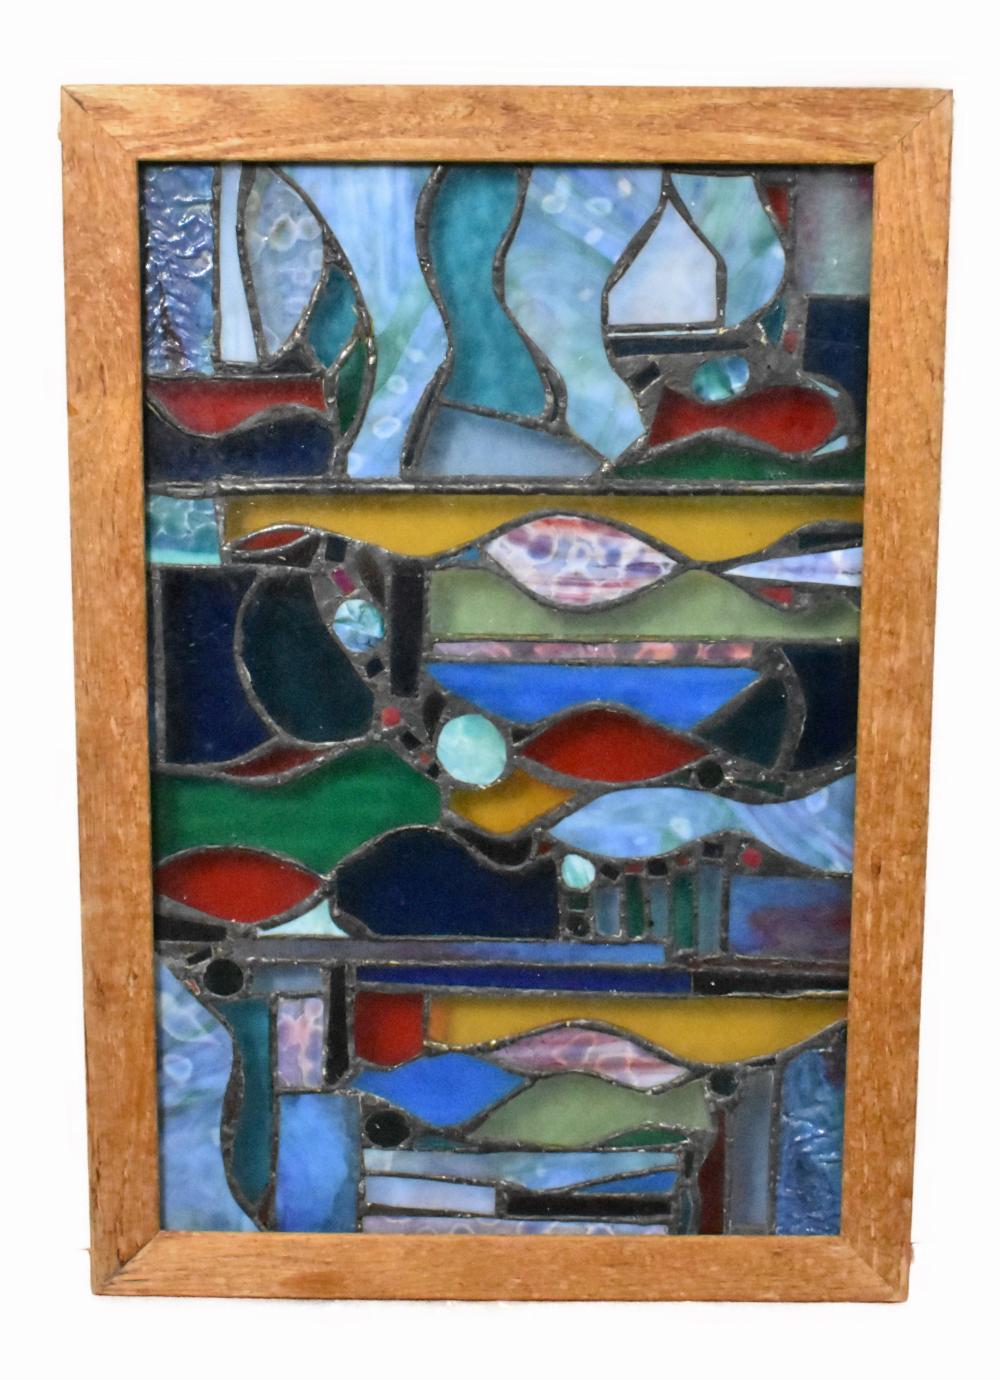 UNIQUE CONTEMPORARY STAINED GLASS